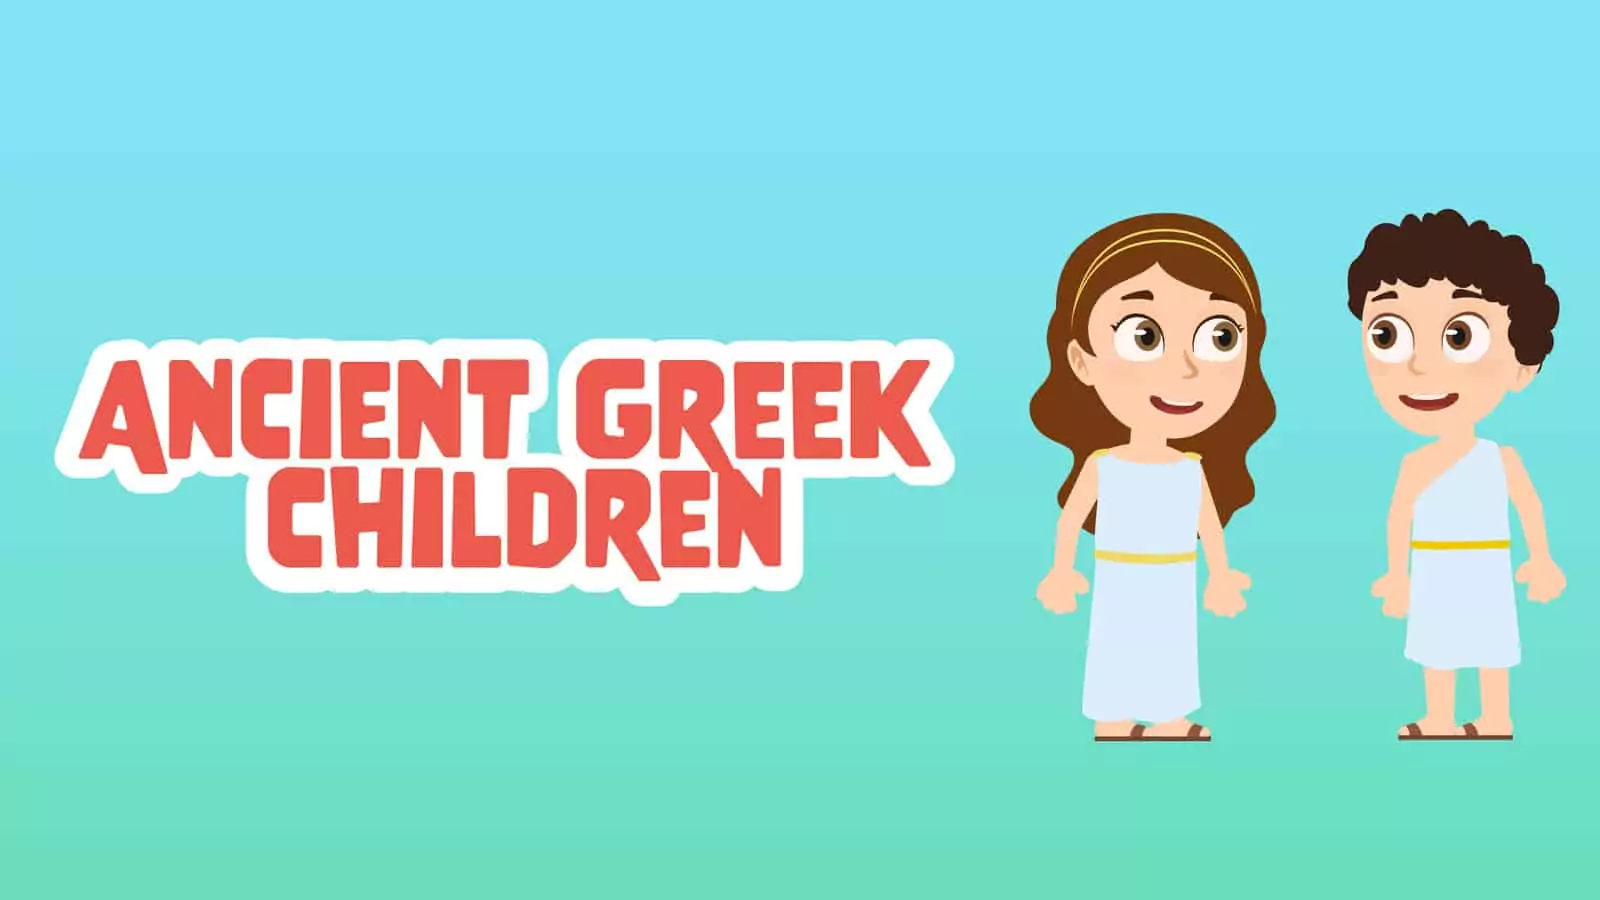 Ancient Greek Children Facts for Kids – 5 Cheerful Facts about The Ancient Greek Children